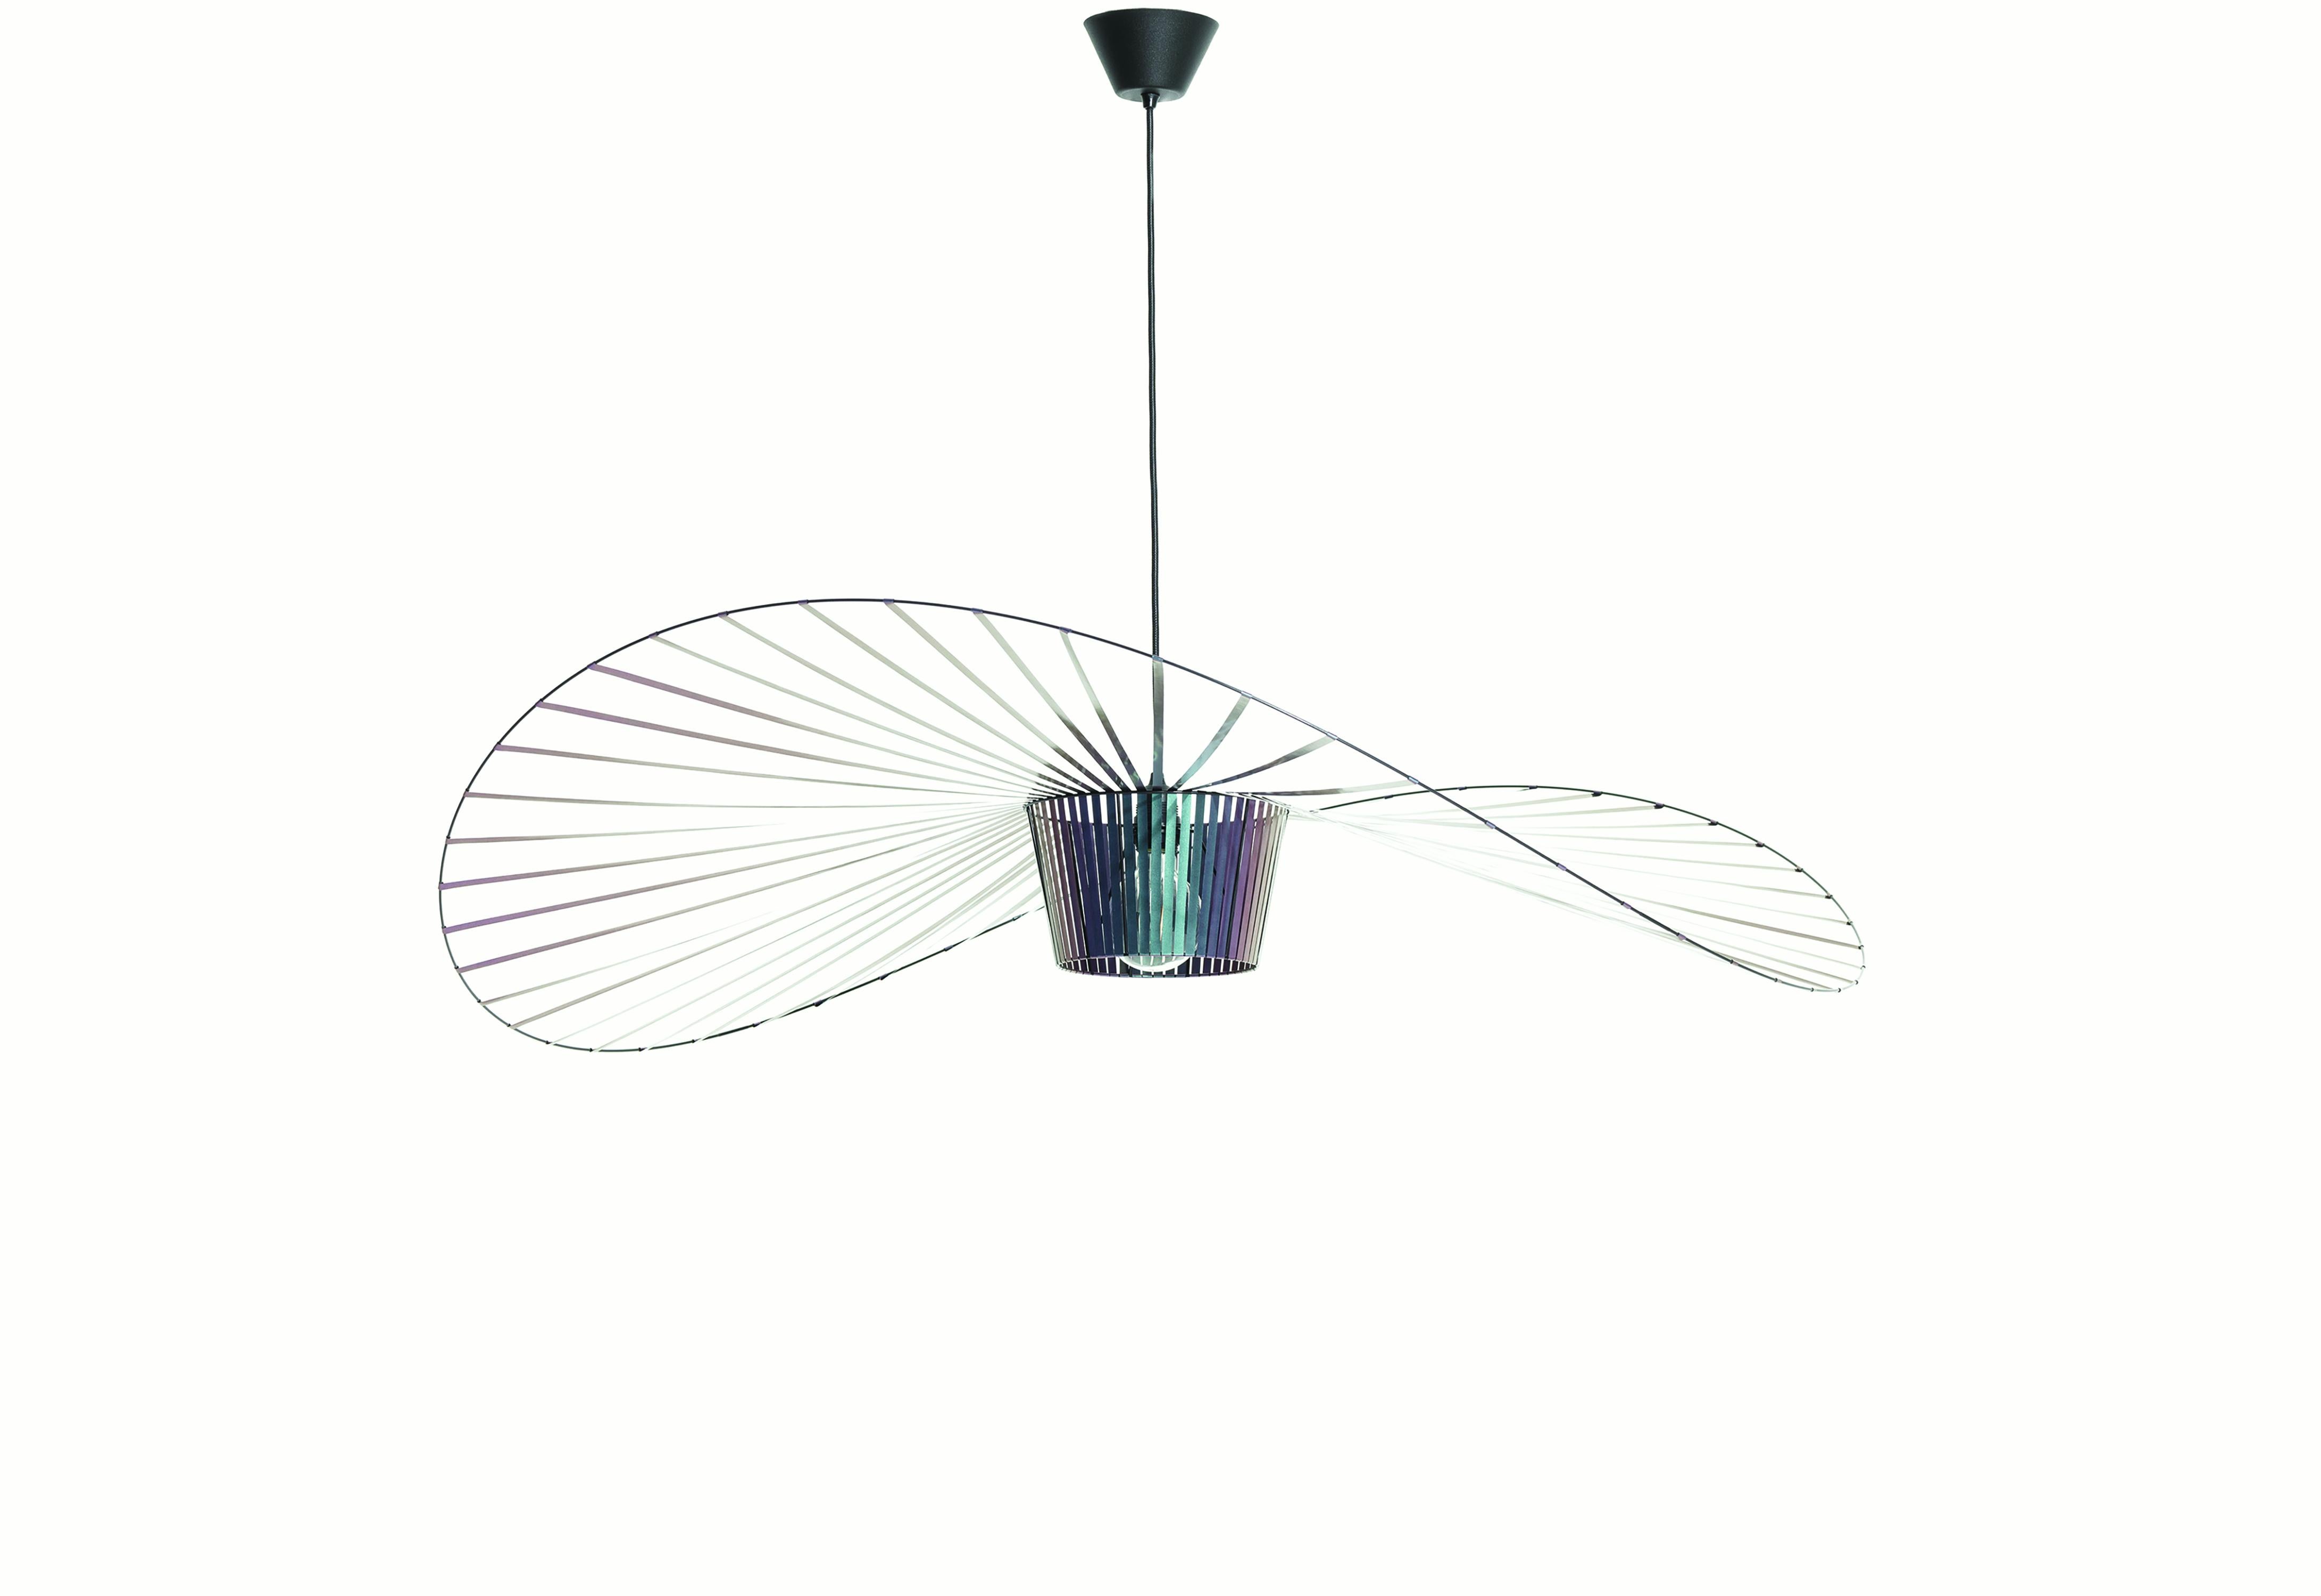 Petite Friture Medium Vertigo Pendant Light in Beetle by Constance Guisset, 2010

Edited by Petite Friture in 2010, the Vertigo pendant light is now an icon of contemporary design. With its ultra-light fiberglass structure, stretched with velvety